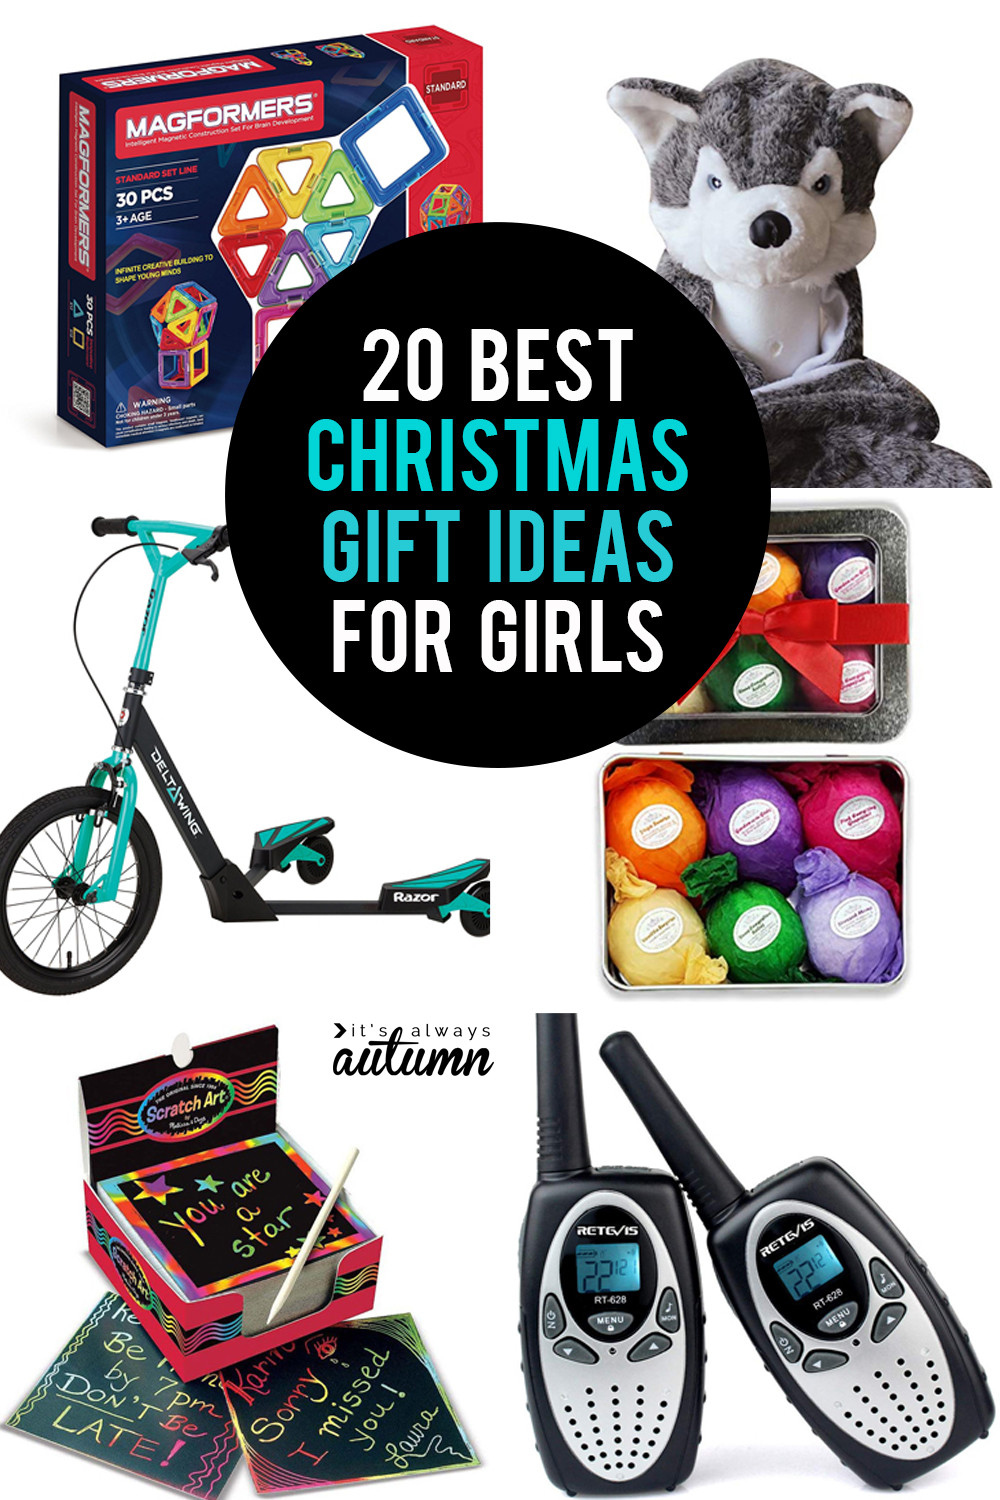 Cool Gift Ideas For Girls
 The 20 best Christmas ts for girls It s Always Autumn